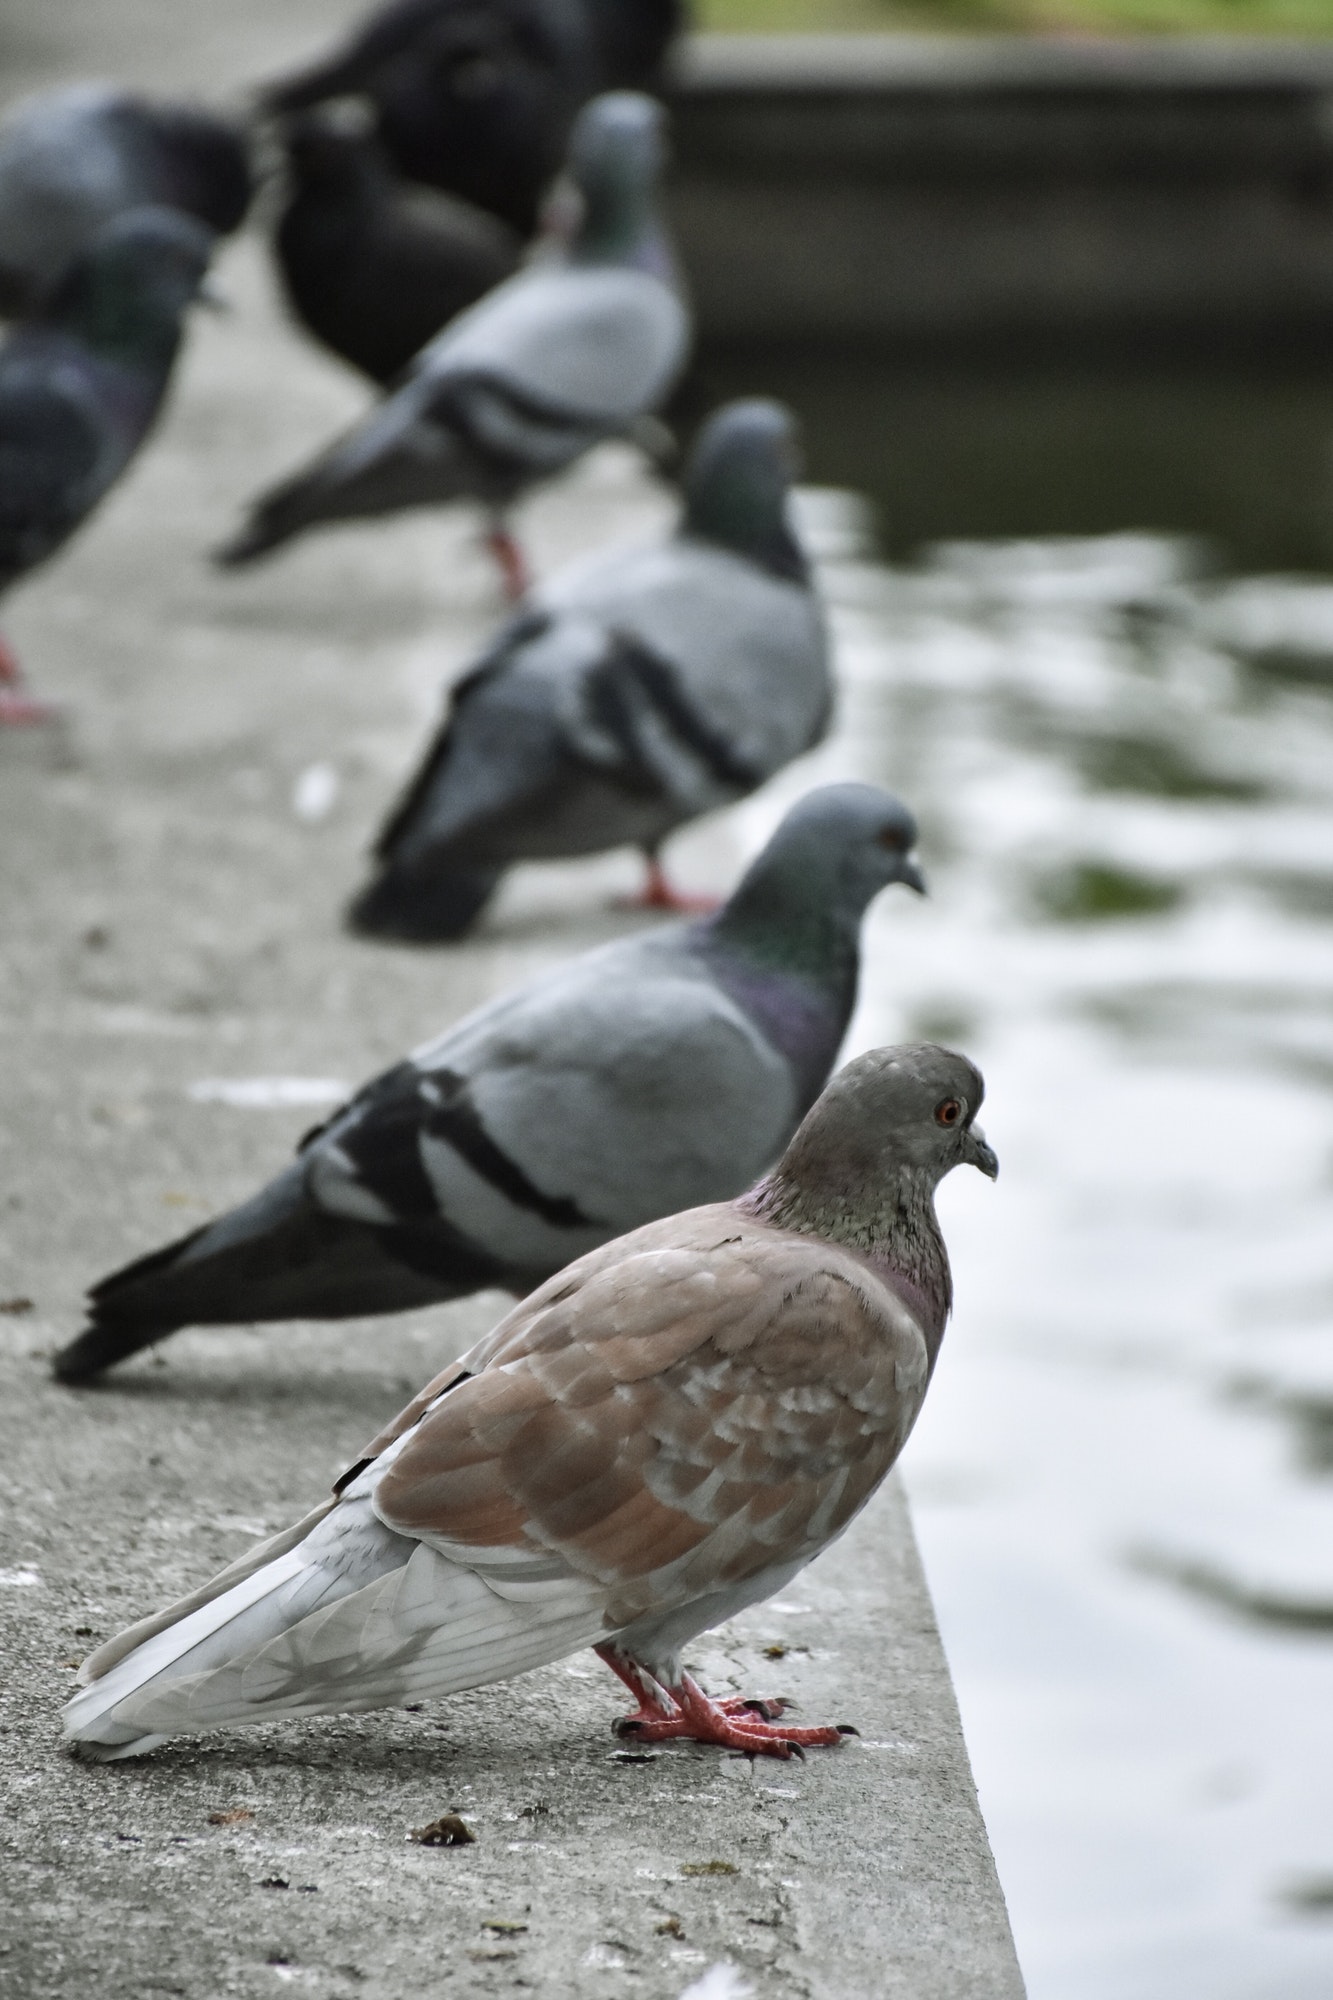 pigeons in the urban environment.